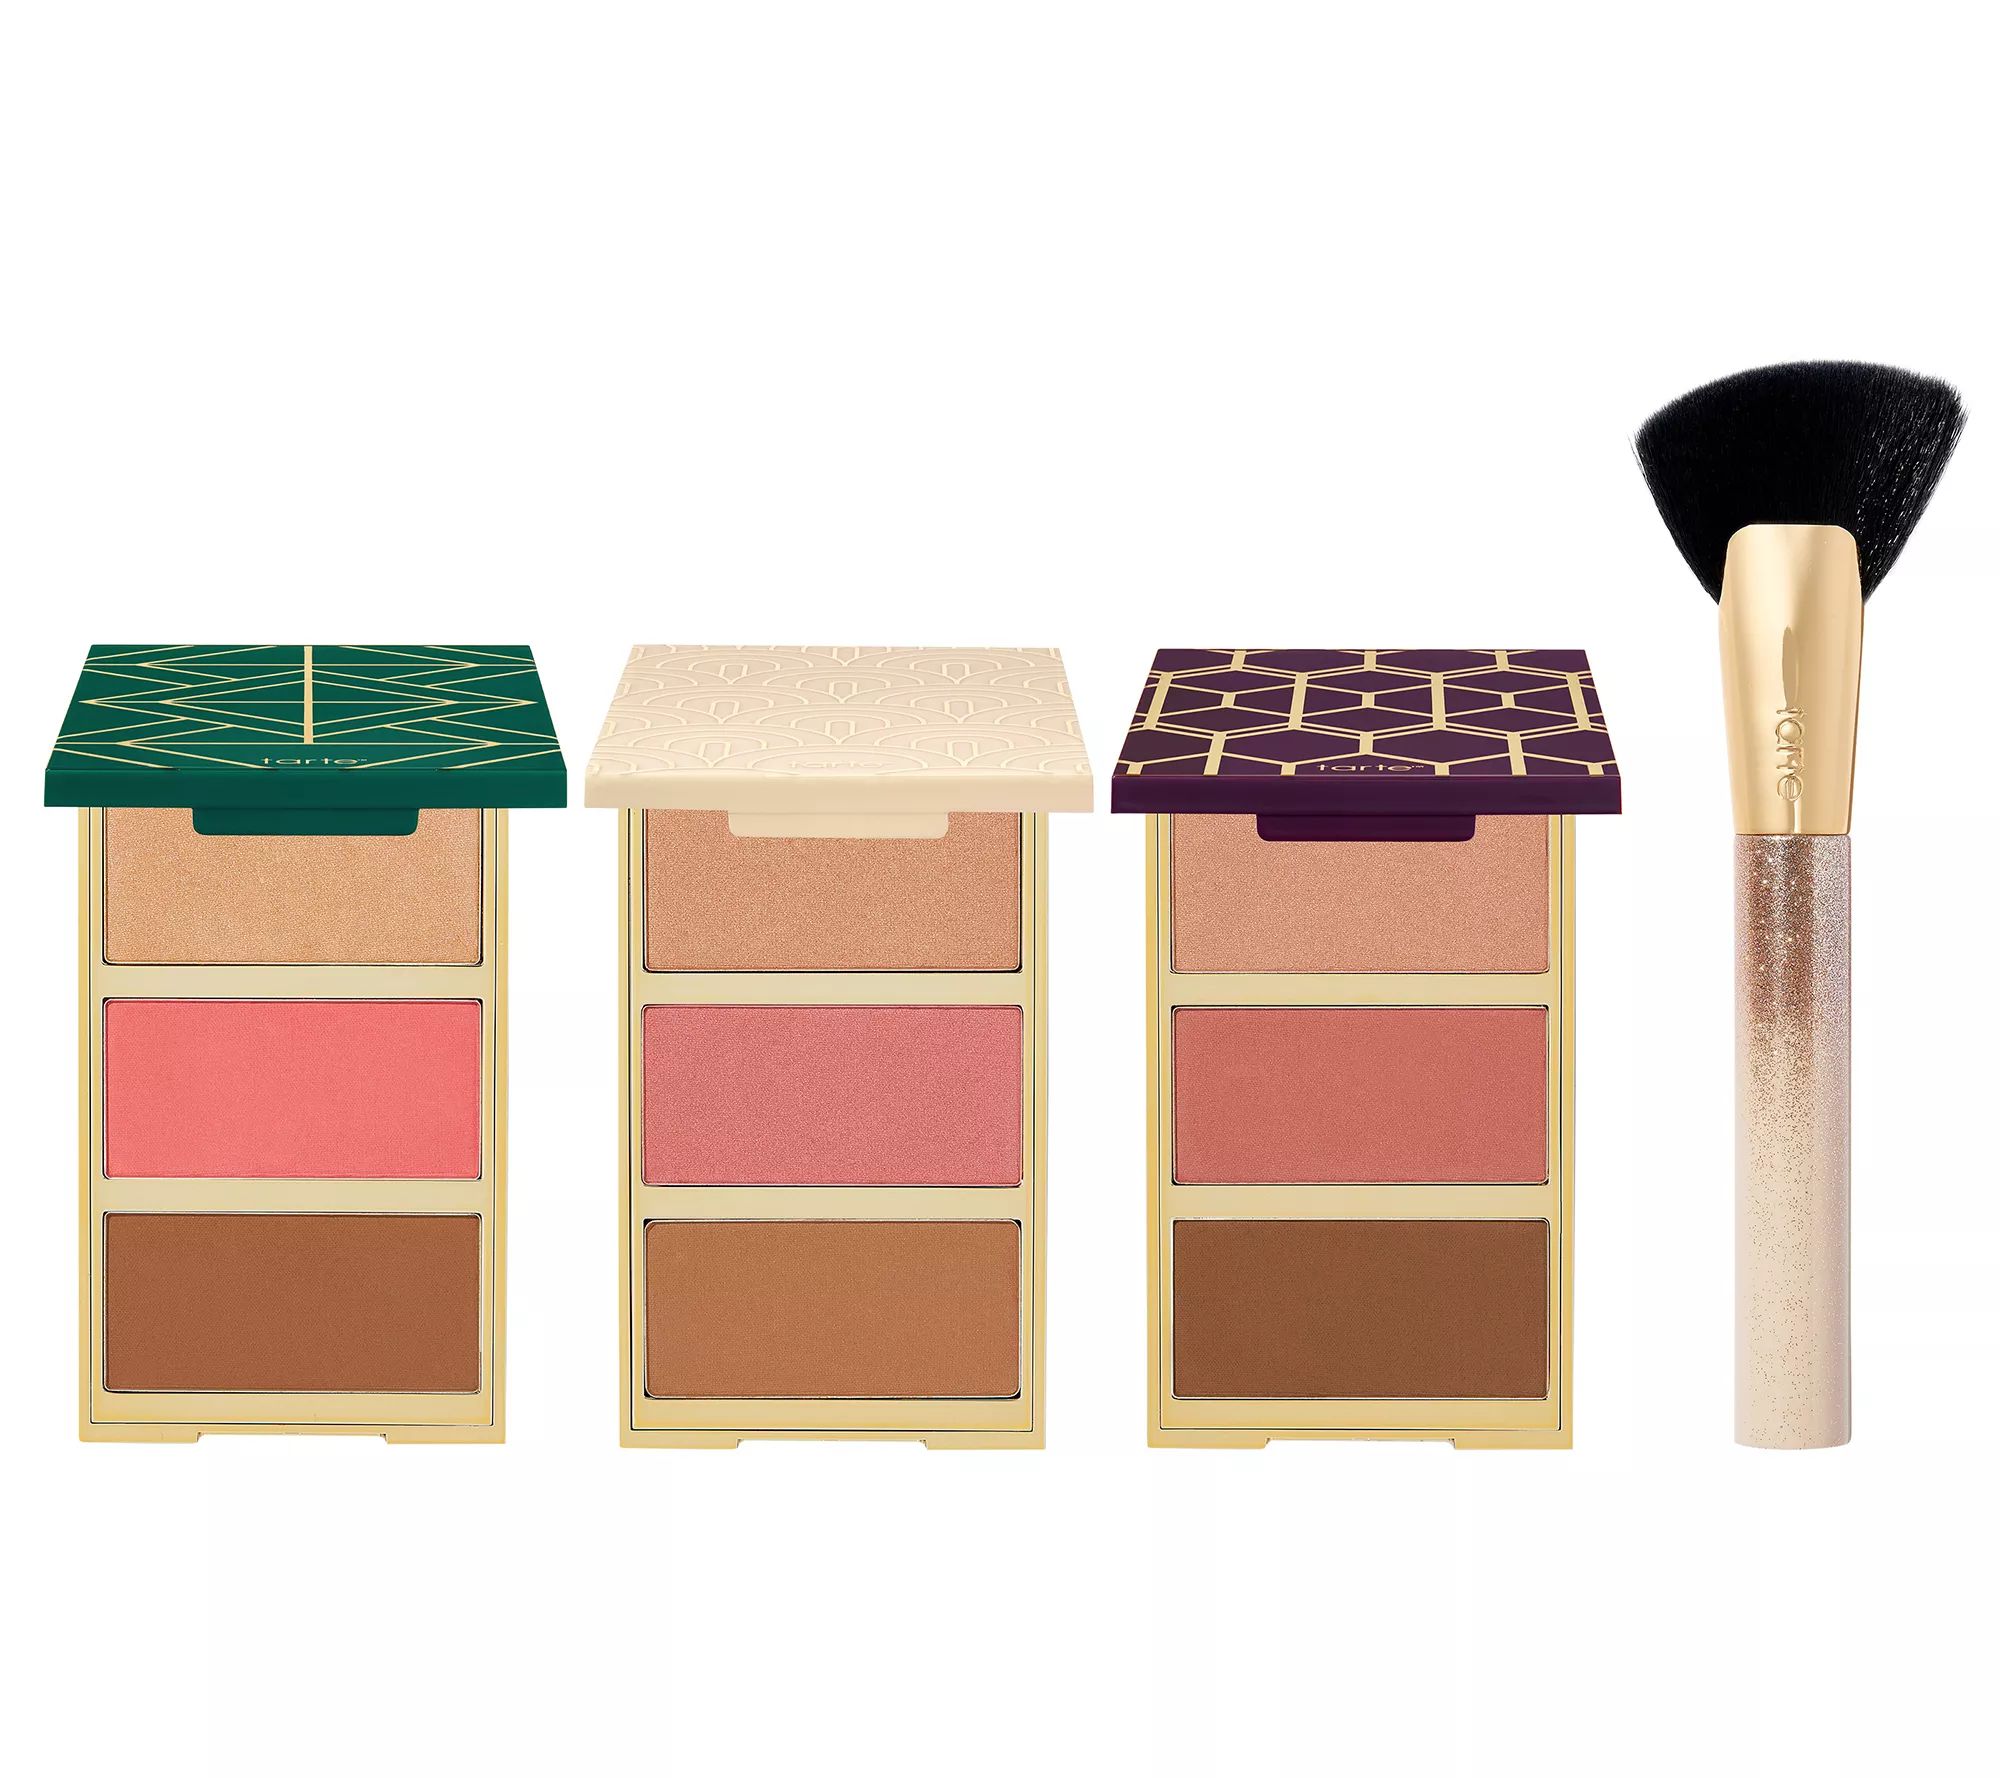 tarte Amazonian Clay 3-in-1 Face Palette Trio with Brush | QVC